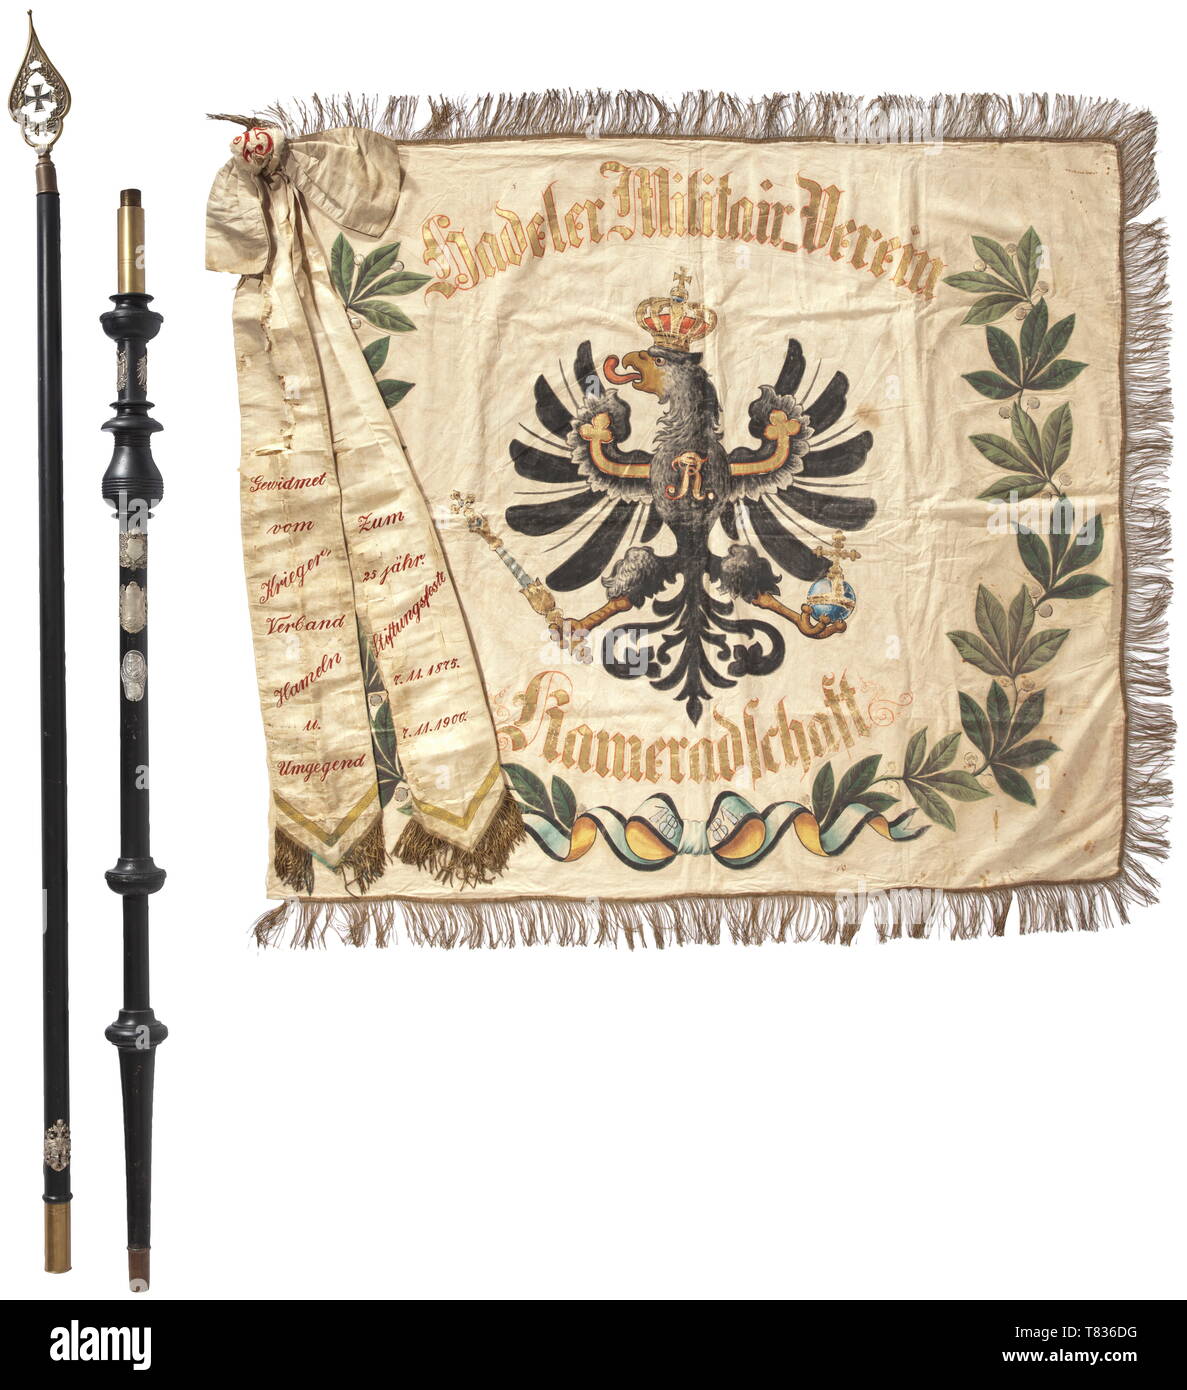 A flag of the veterans´ association of the Infantry Regiment no. 77 The Regiment '2. Hannoversche' was established with its base in Celle in 1813. The flag of polychrome silk cloth with gold fringe border, embroidered inscriptions 'Verein ehemaliger 77er - Hamburg und Umgebung' and 'Mit Gott für Kaiser und Reich - 1901 - 2. Hannov. Inf. R. 77', size circa 130 x 140 cm. With flag pole of blackened hard wood, collapsible into two pieces. Brass finial, pierced with soldered-in multi-part Iron Cross of 1914. On the pole a total of nine mounted flag n, Additional-Rights-Clearance-Info-Not-Available Stock Photo